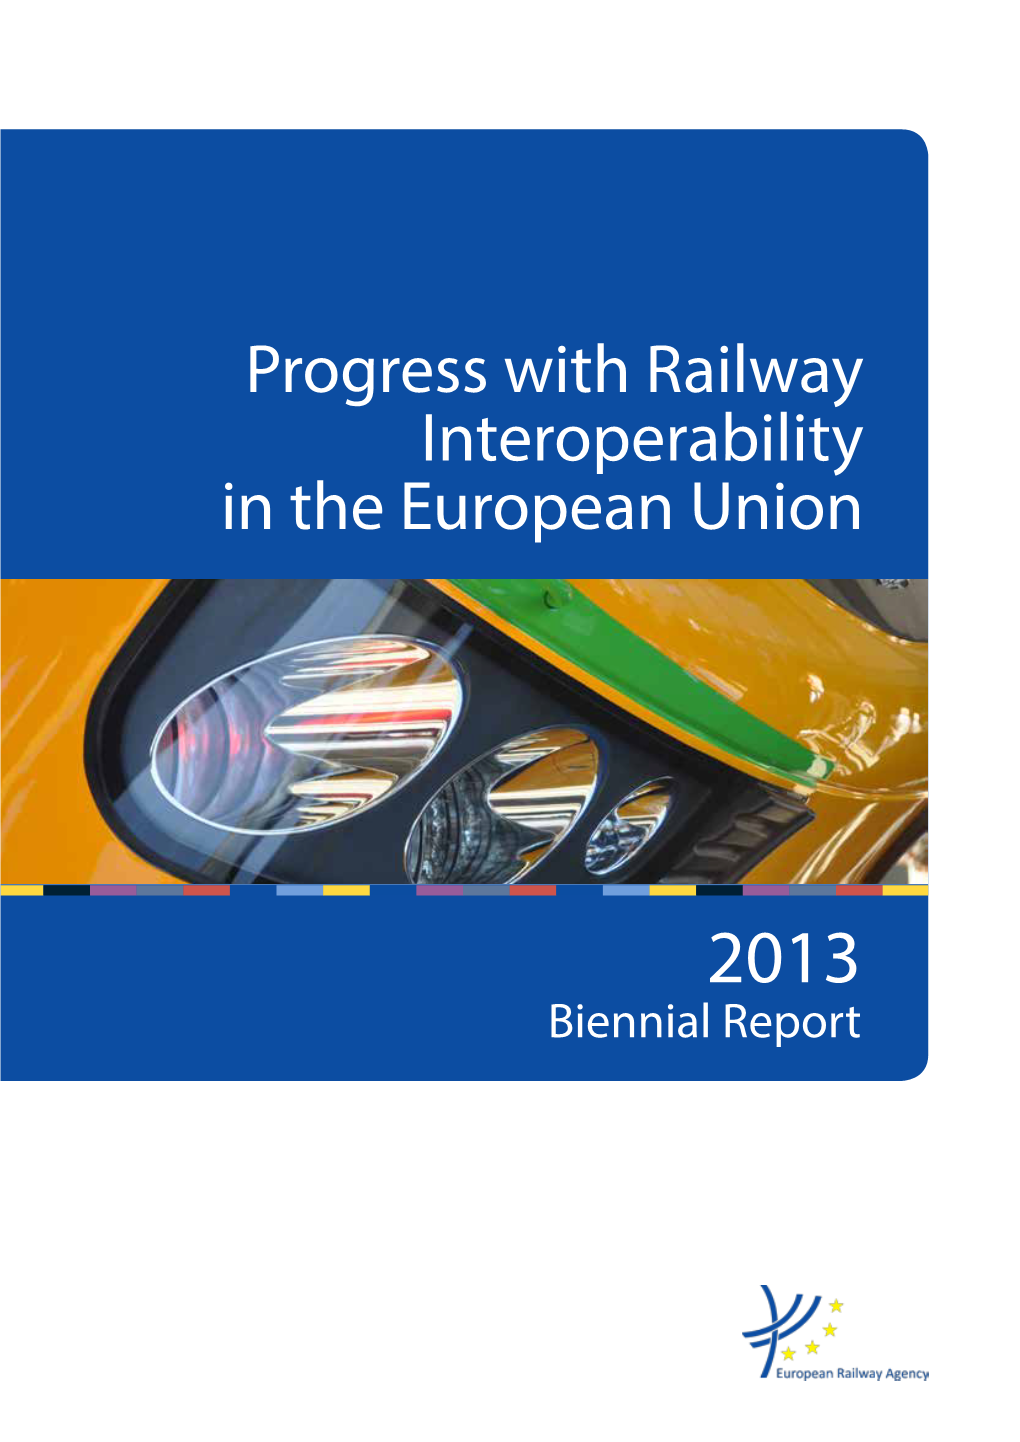 Biennial Report on the Progress with Railway Interoperability in The